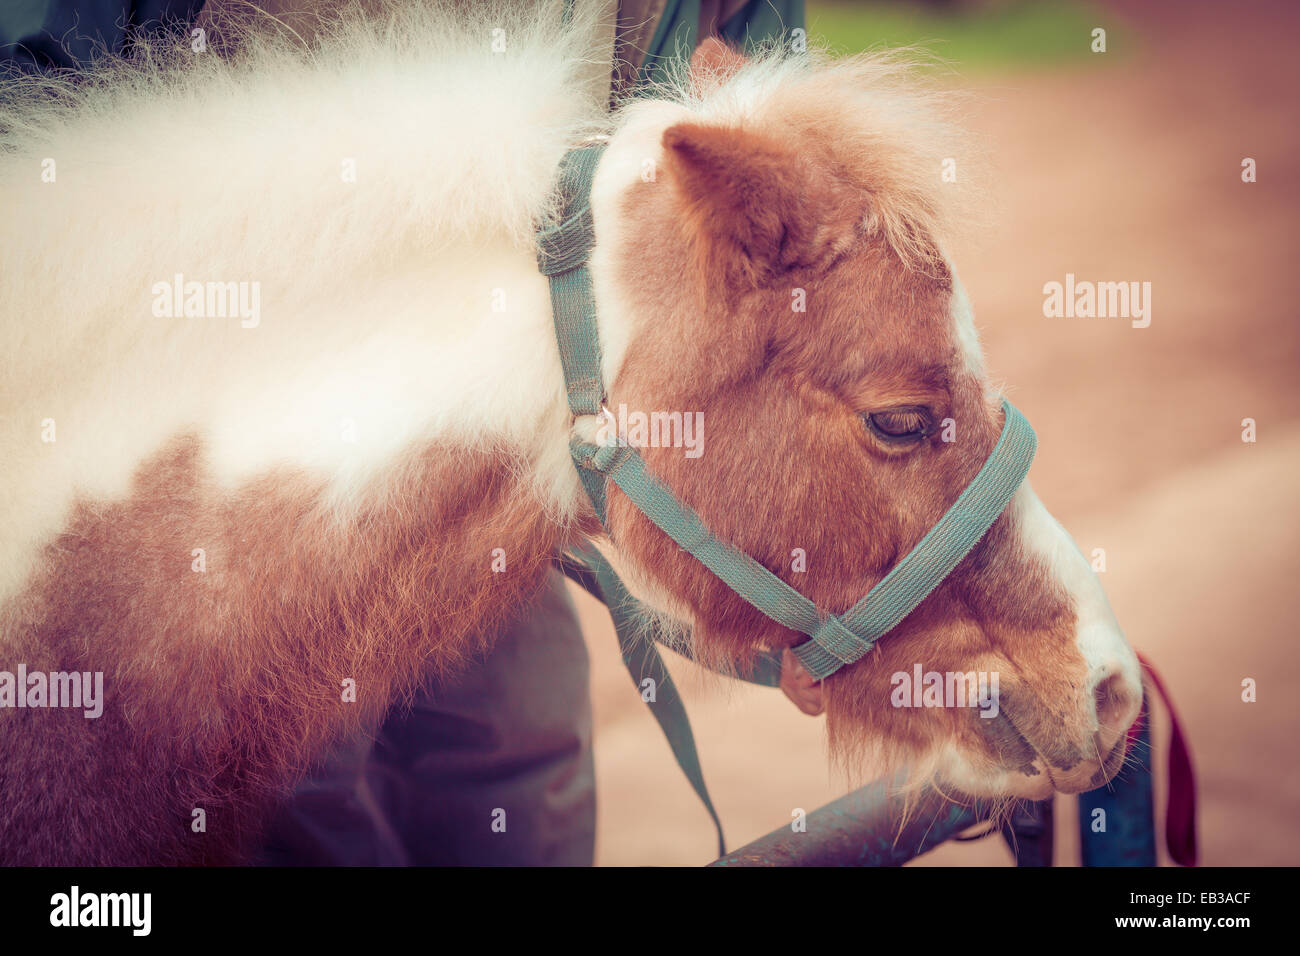 Portrait of a pony wearing a harness, Morocco Stock Photo